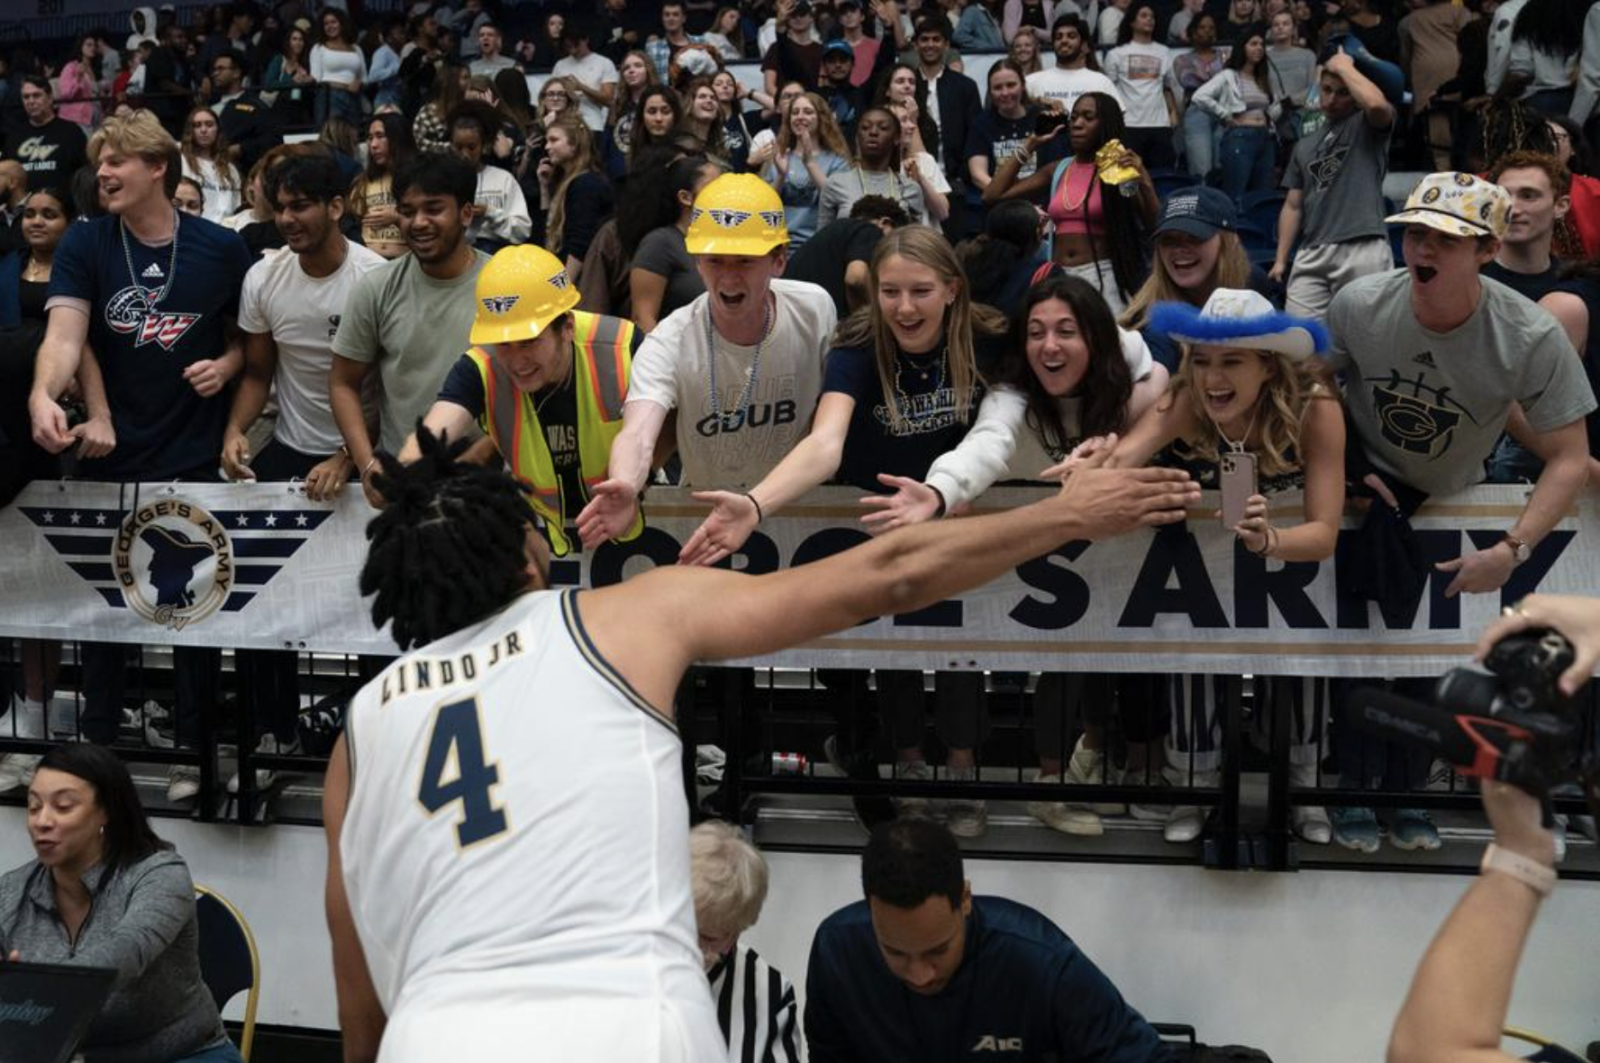 GW basketball player Lindo Jr high fives fans in the stands